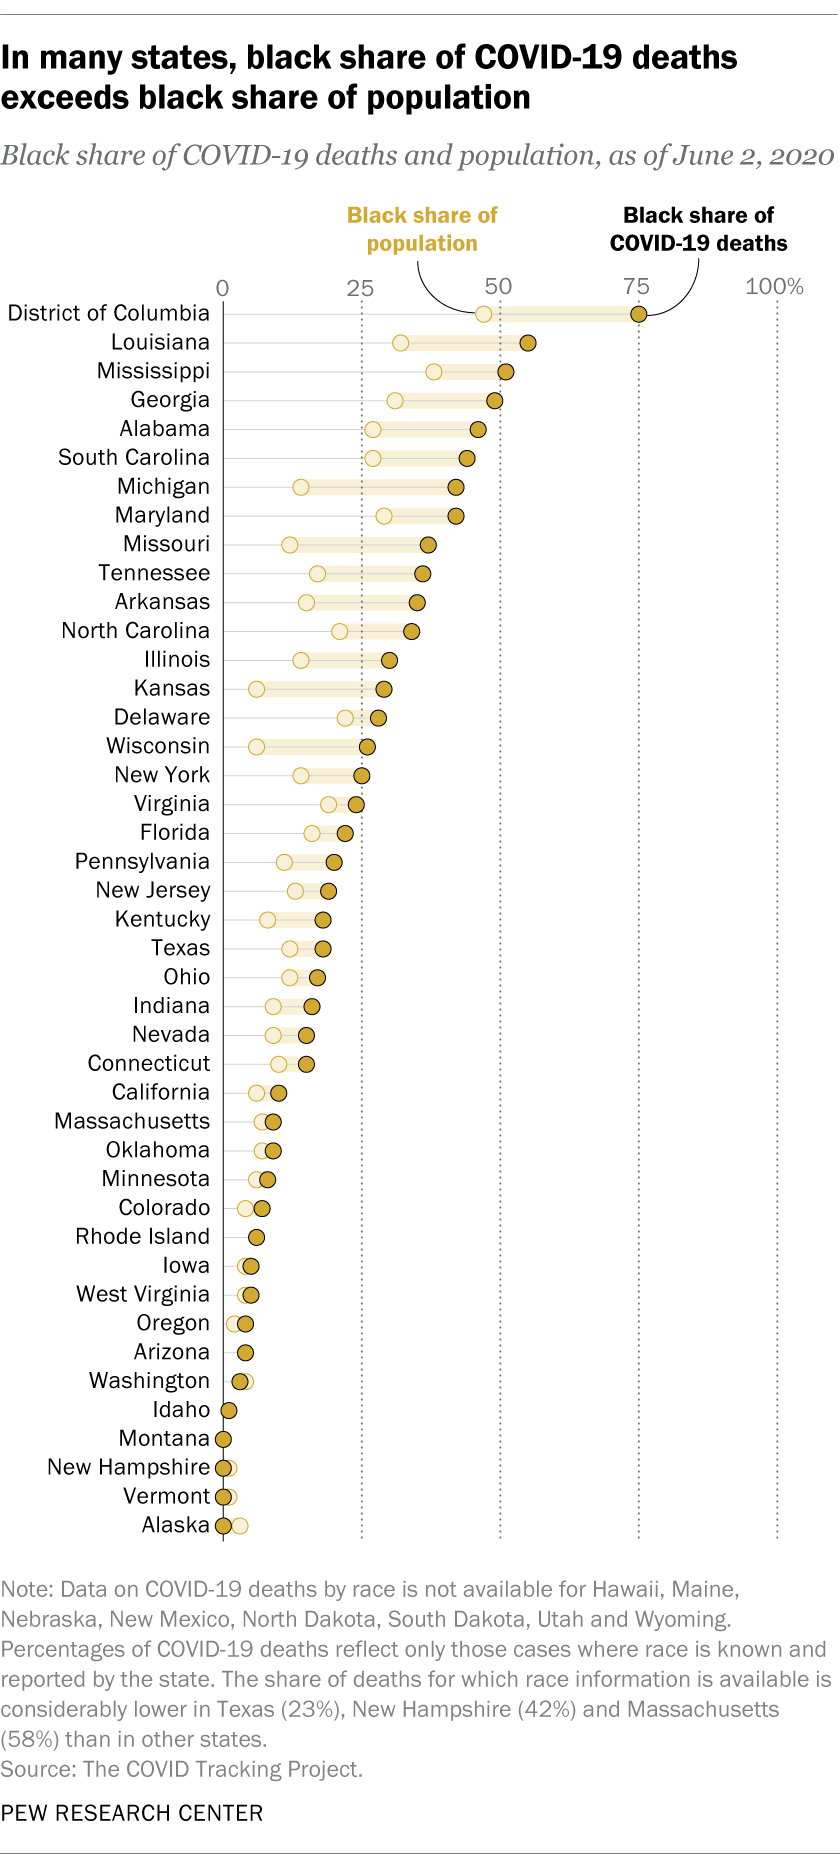 In many states, black share of COVID-19 deaths exceeds black share of population